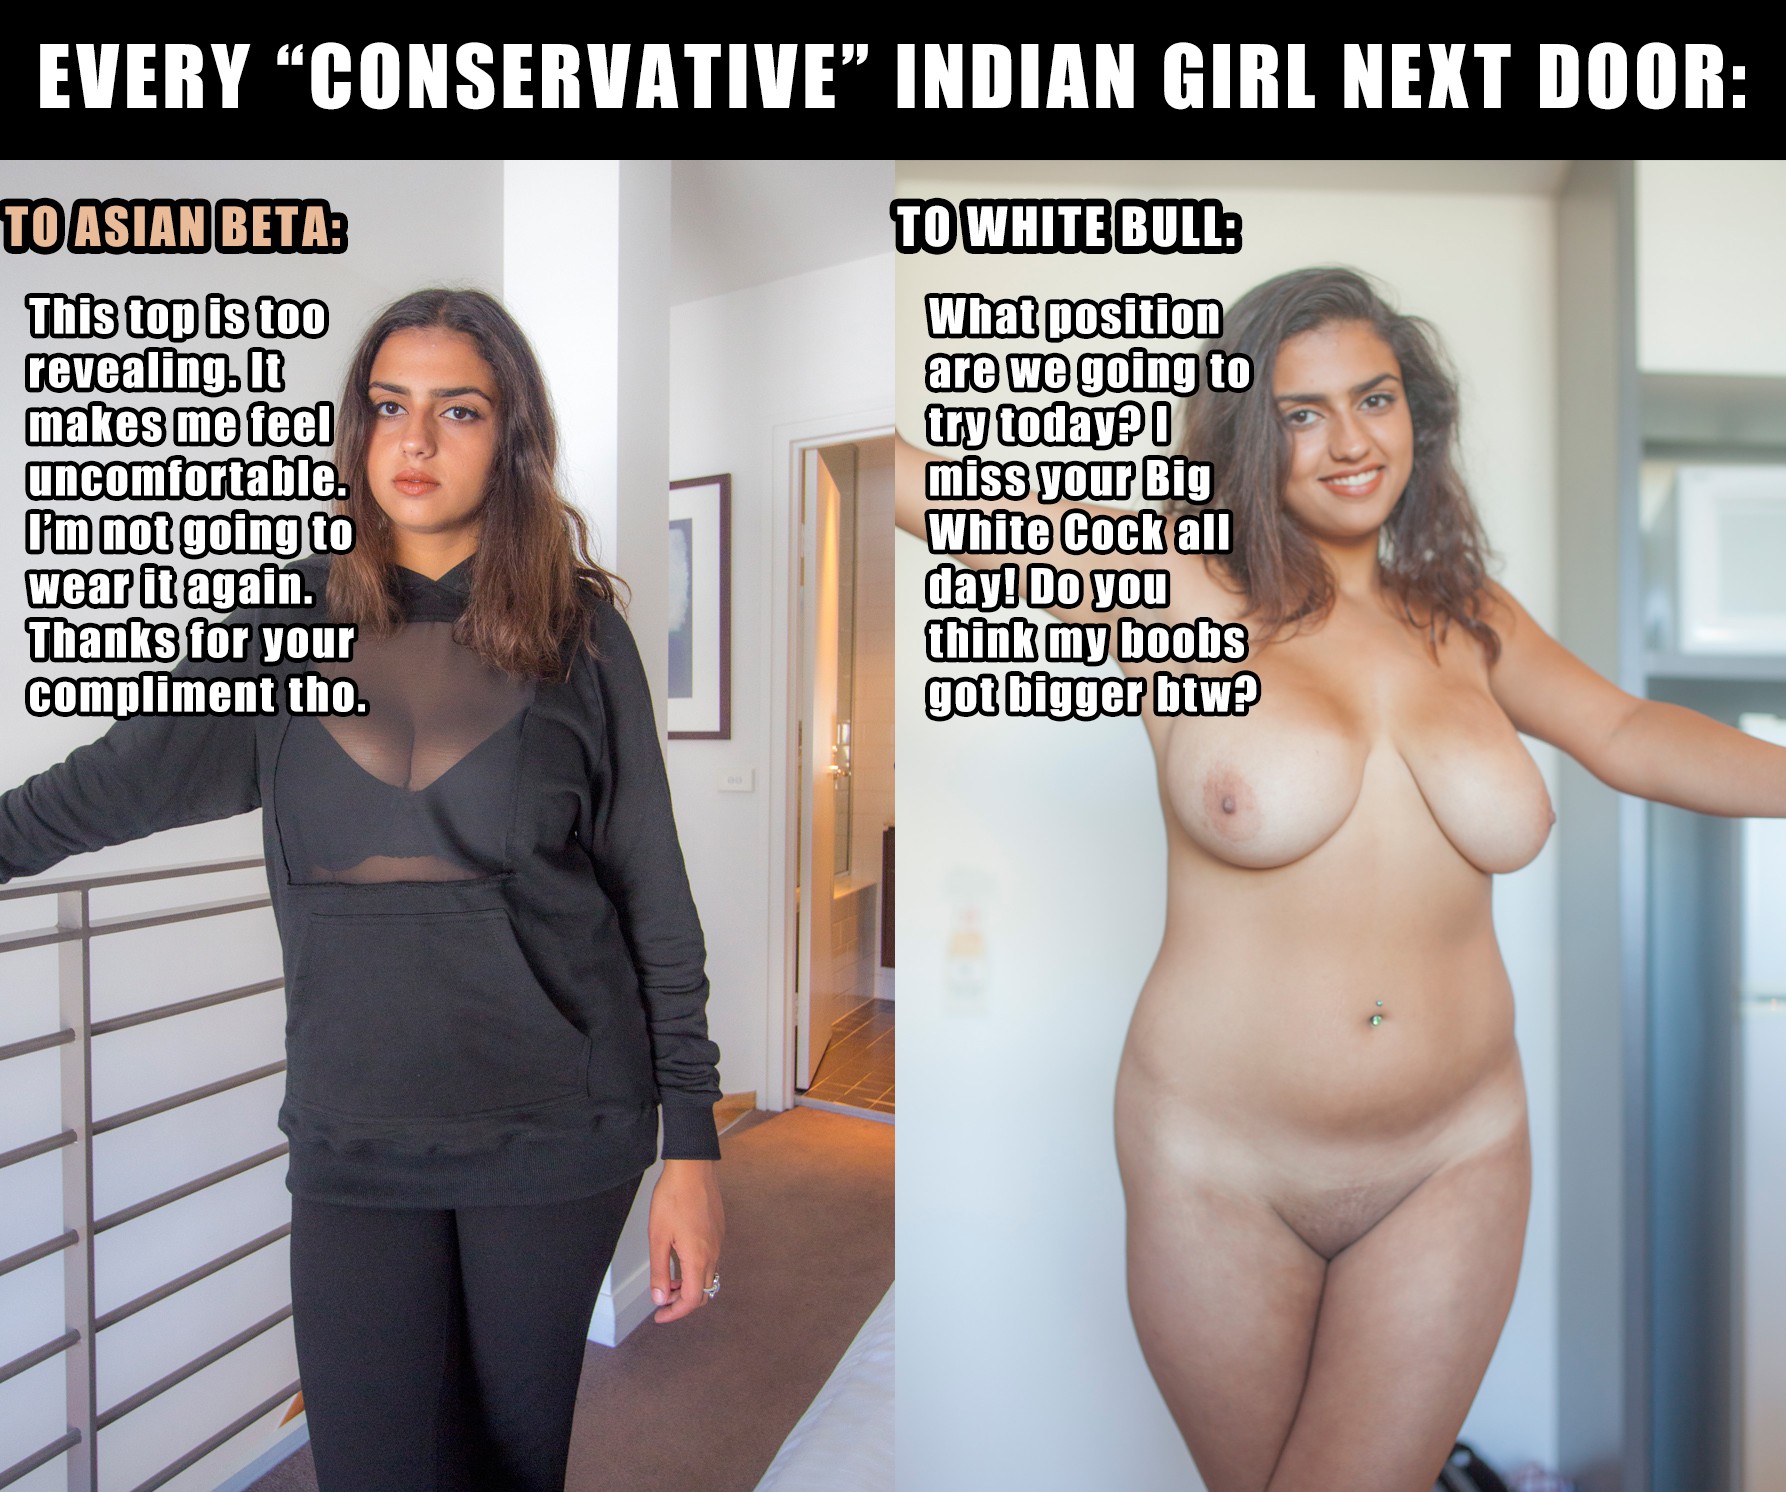 Indian girl next door reacts to white bull cock vs beta dick pic